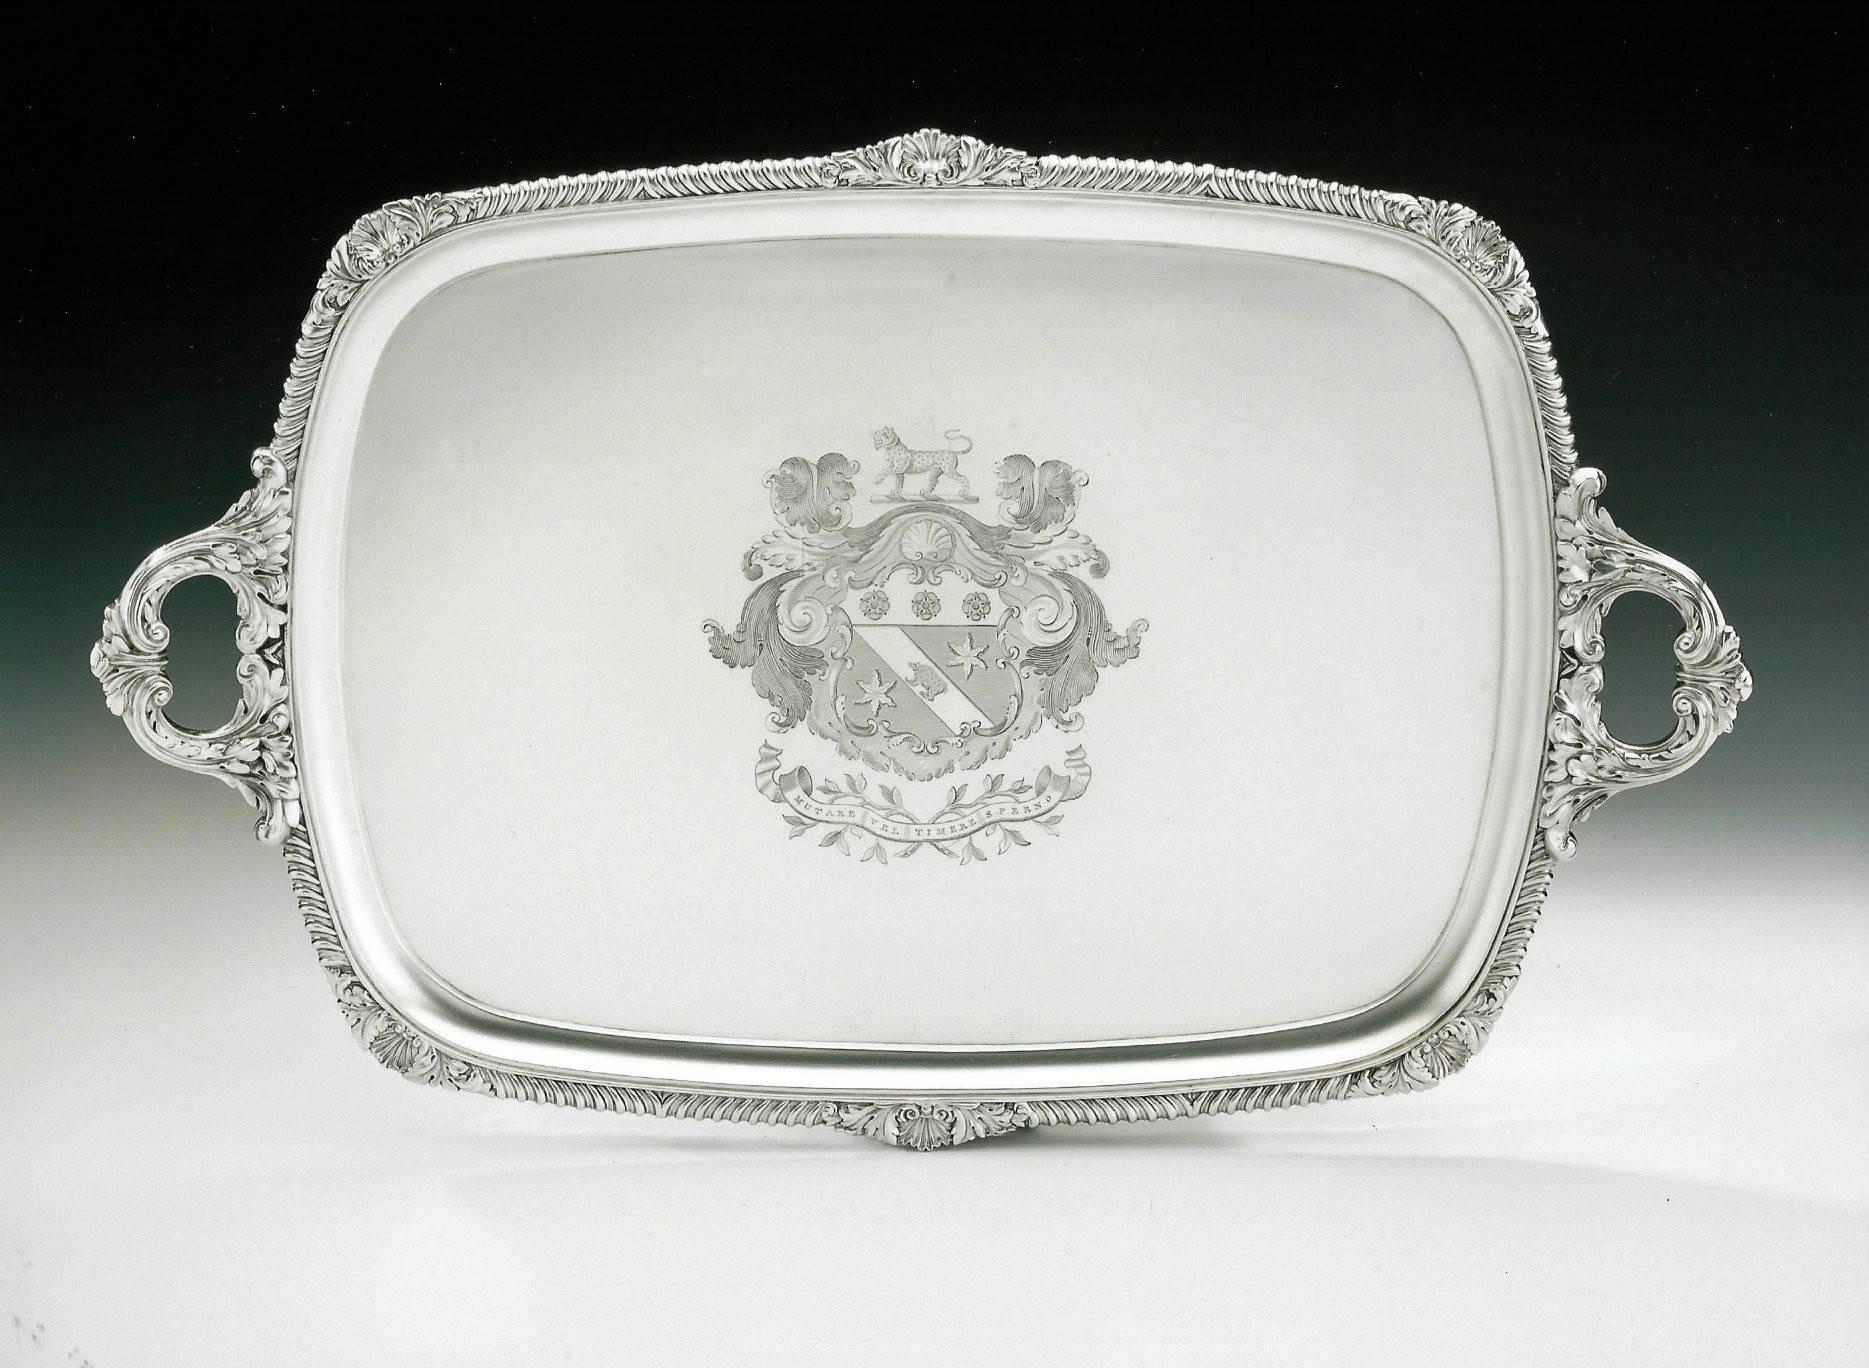 An exceptional George IV Drinks Tray made in London in 1826 by William Eley II.